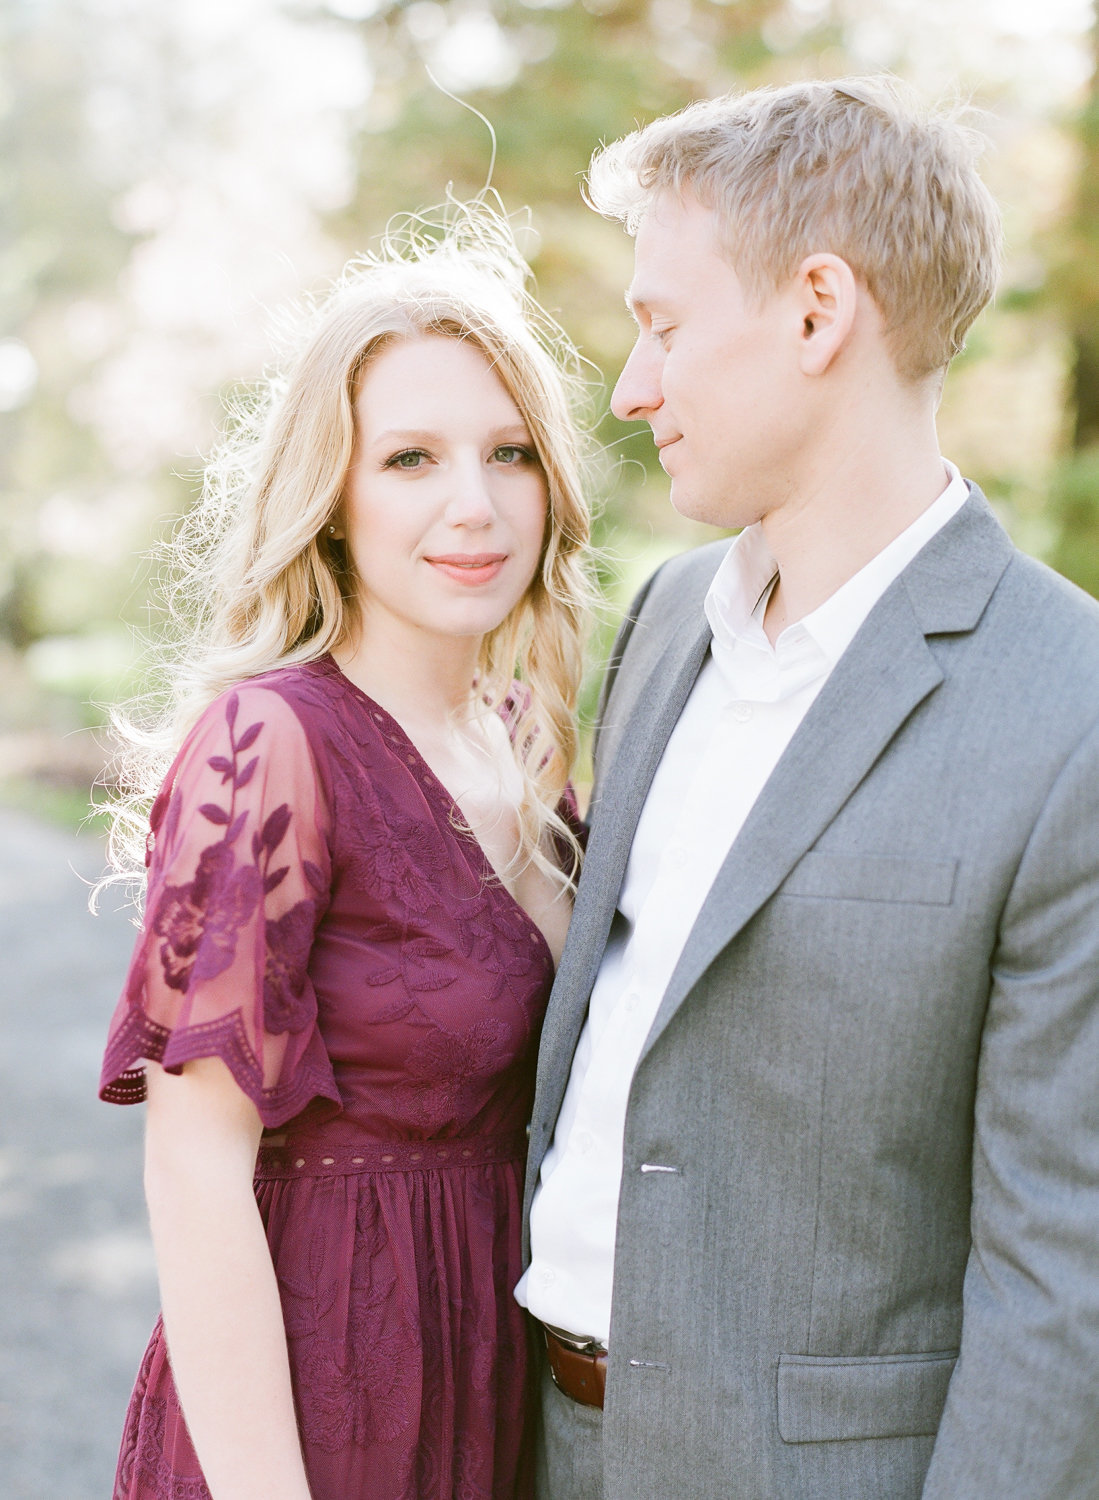 Jacqueline Anne Photography - Amanda and Brent-94